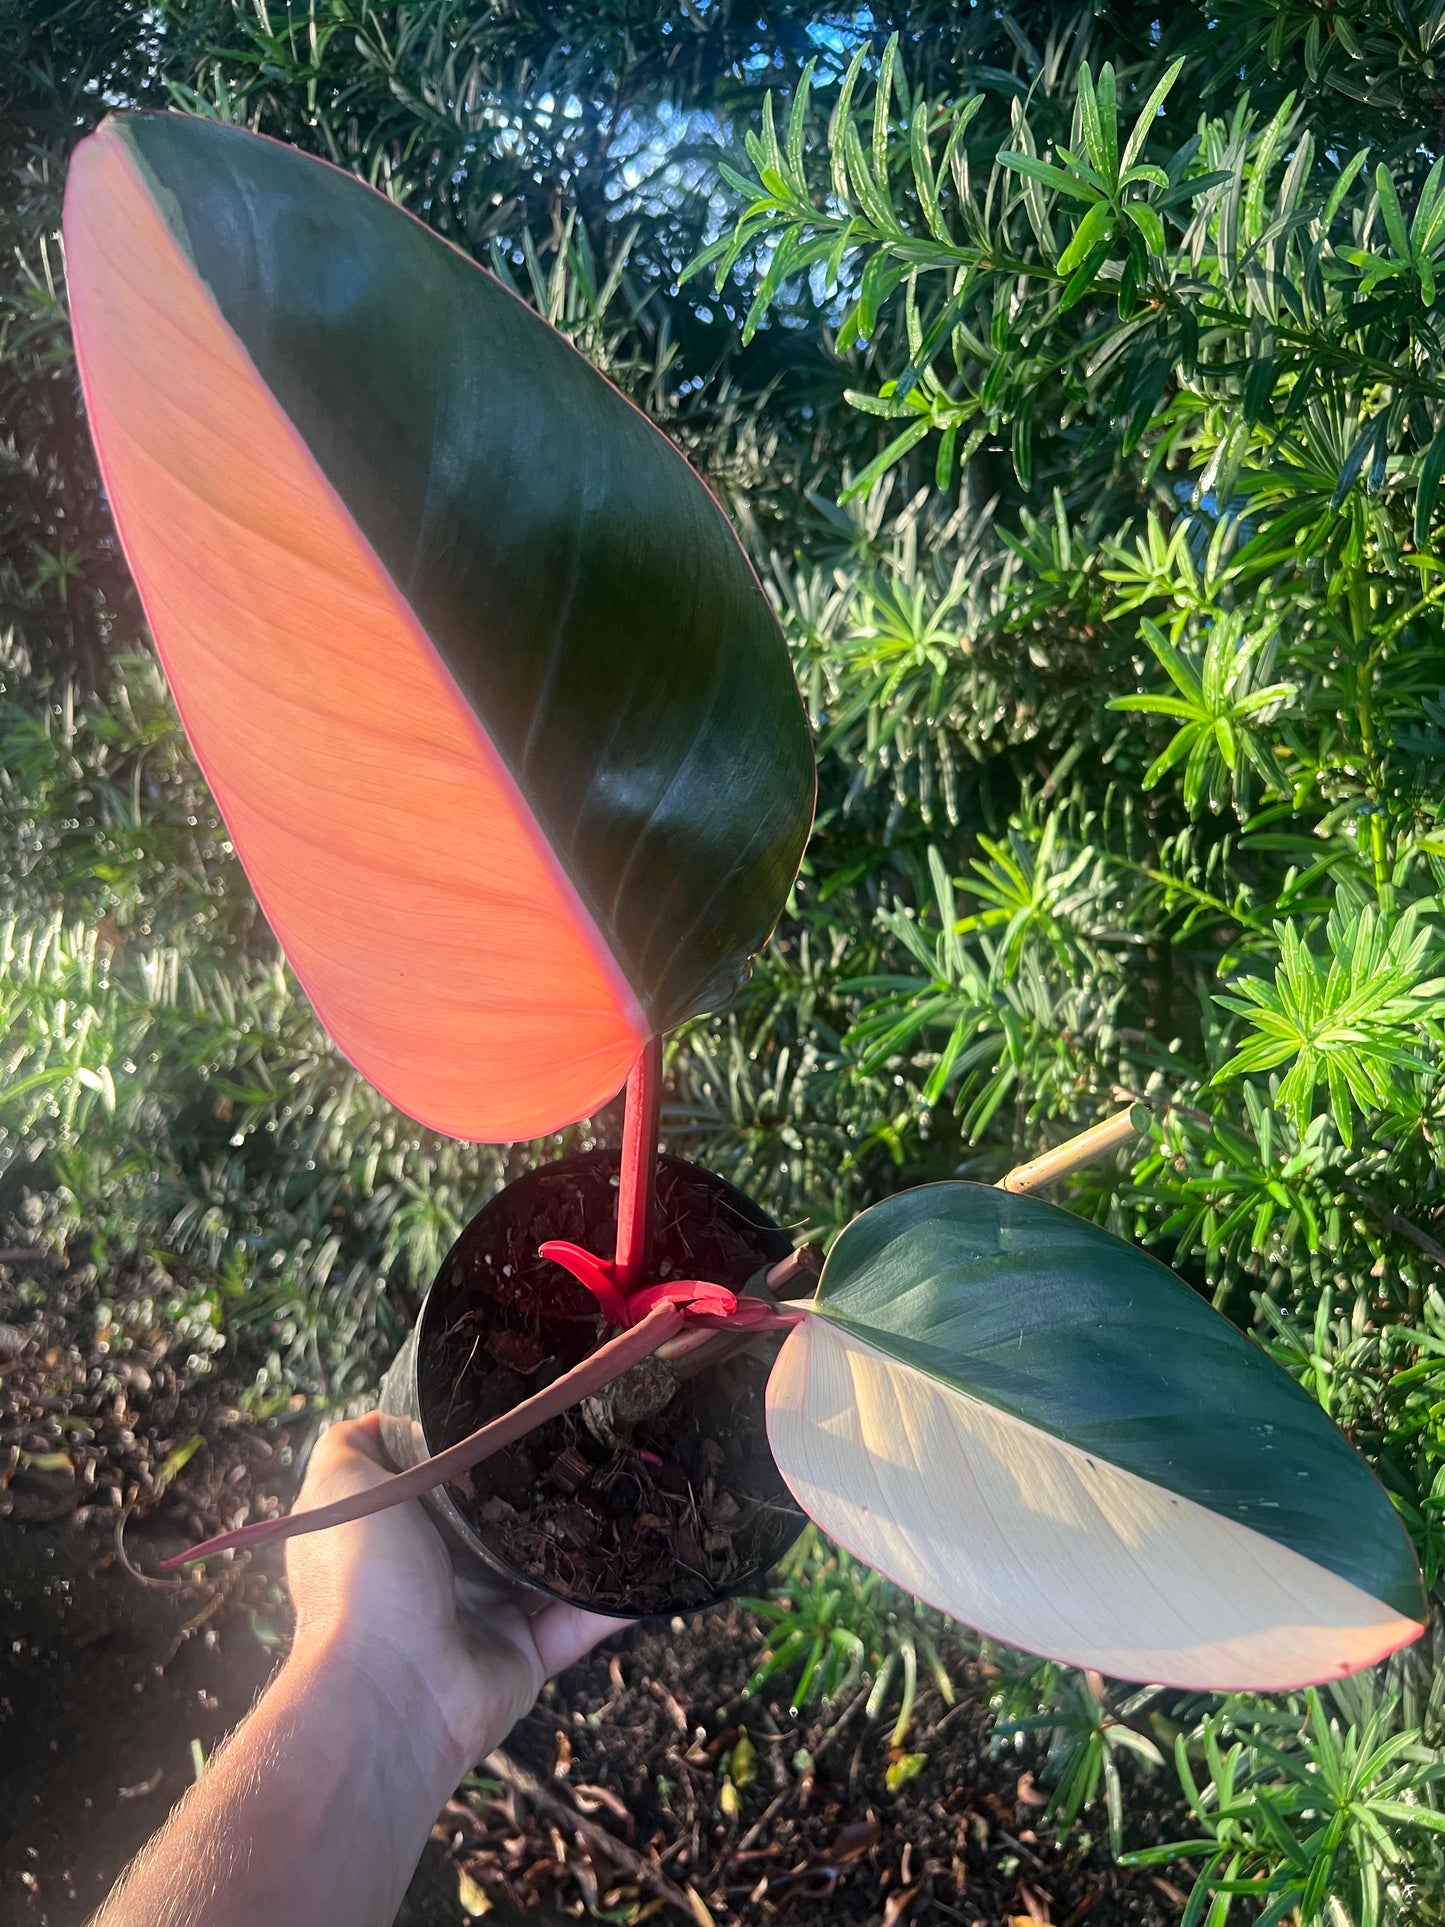 Philodendron "Red Congo" Variegated